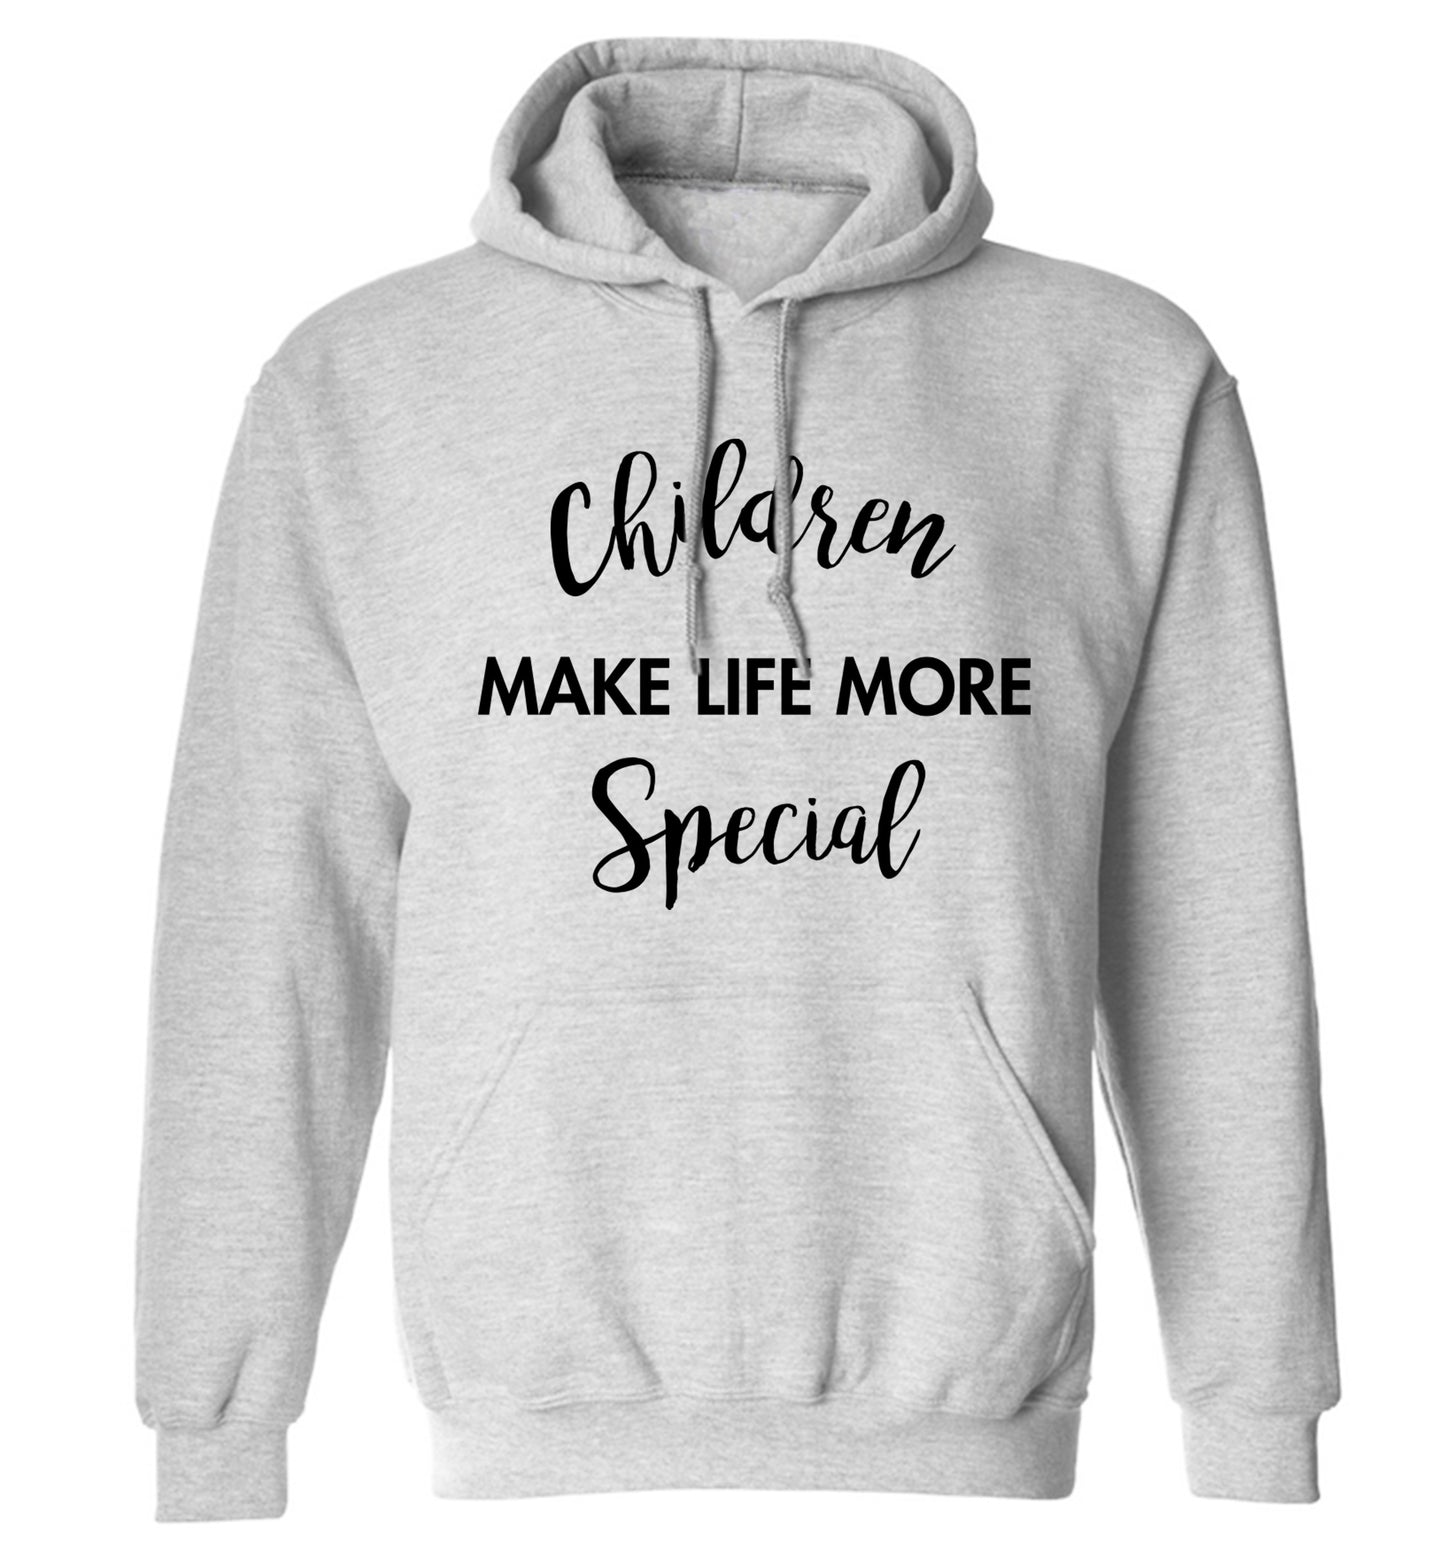 Children make life more special adults unisex grey hoodie 2XL